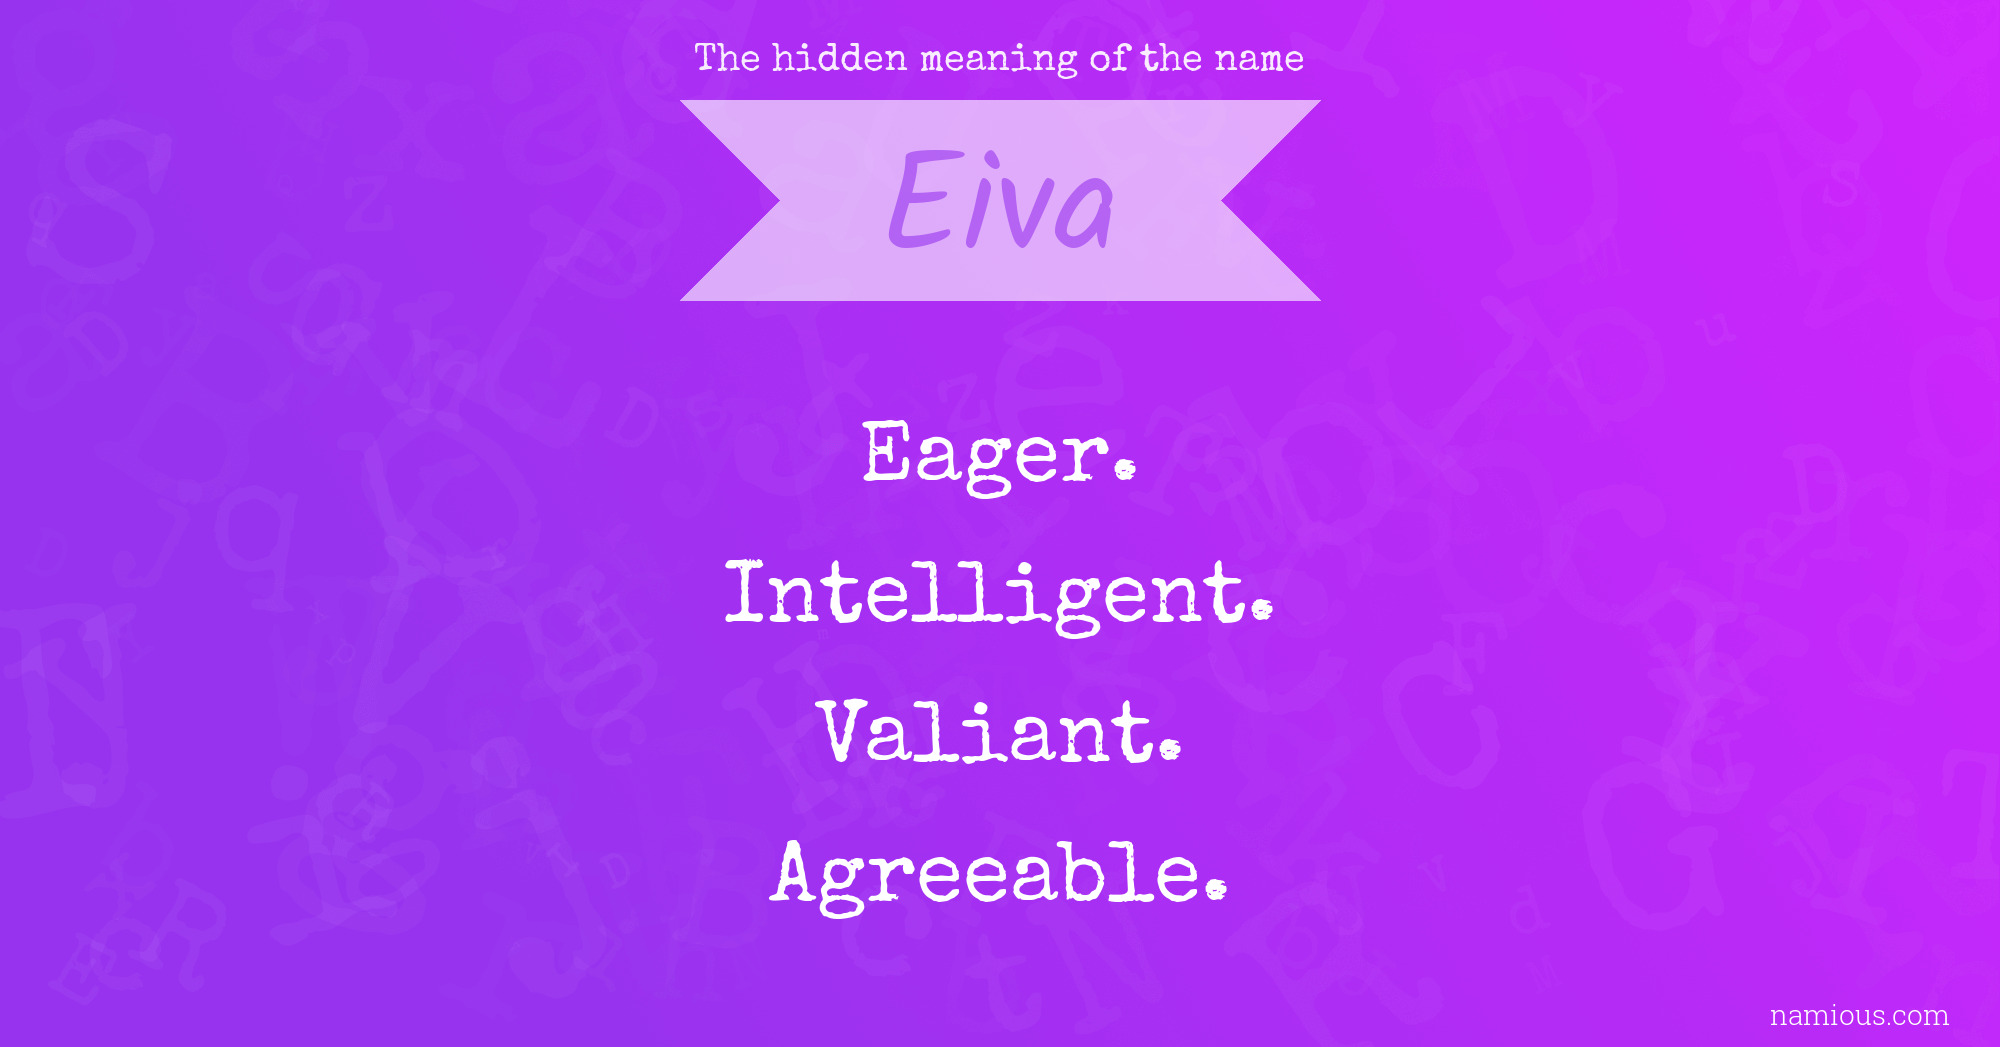 The hidden meaning of the name Eiva